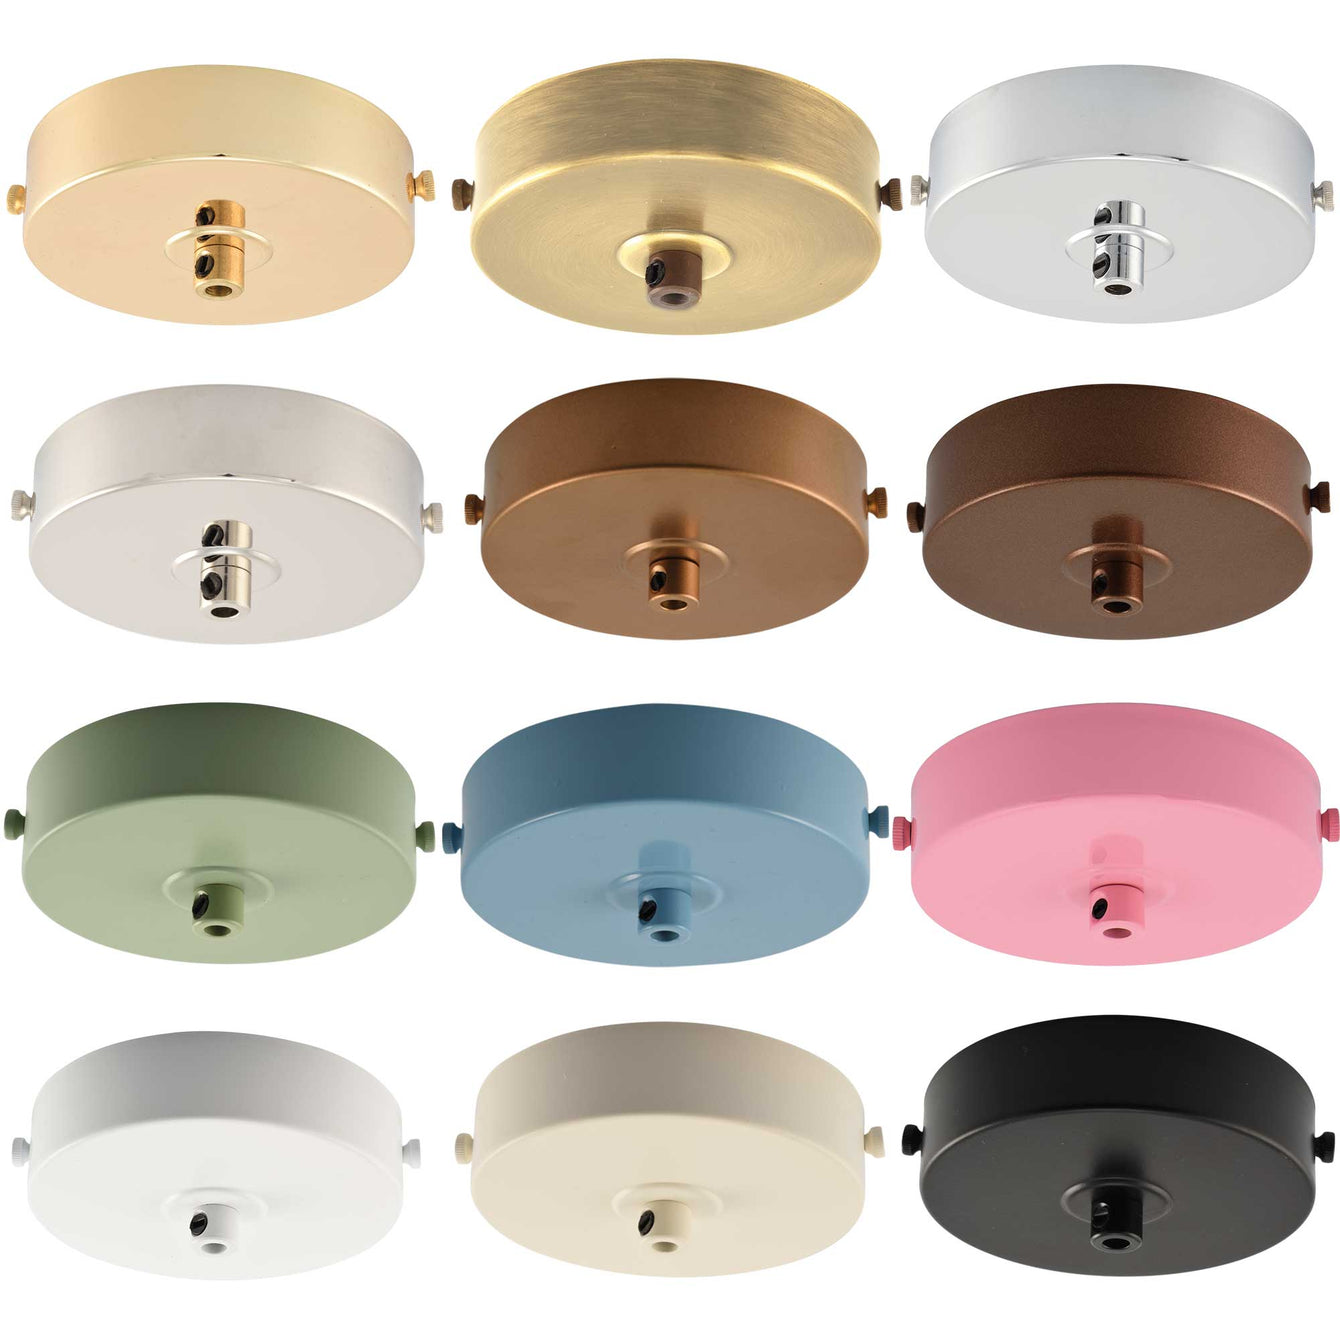 ElekTek Flat Top Ceiling Pendant Rose 100mm Diameter with Strap Bracket and Cord Grip Metallic Finishes Powder Coated Colours Brass